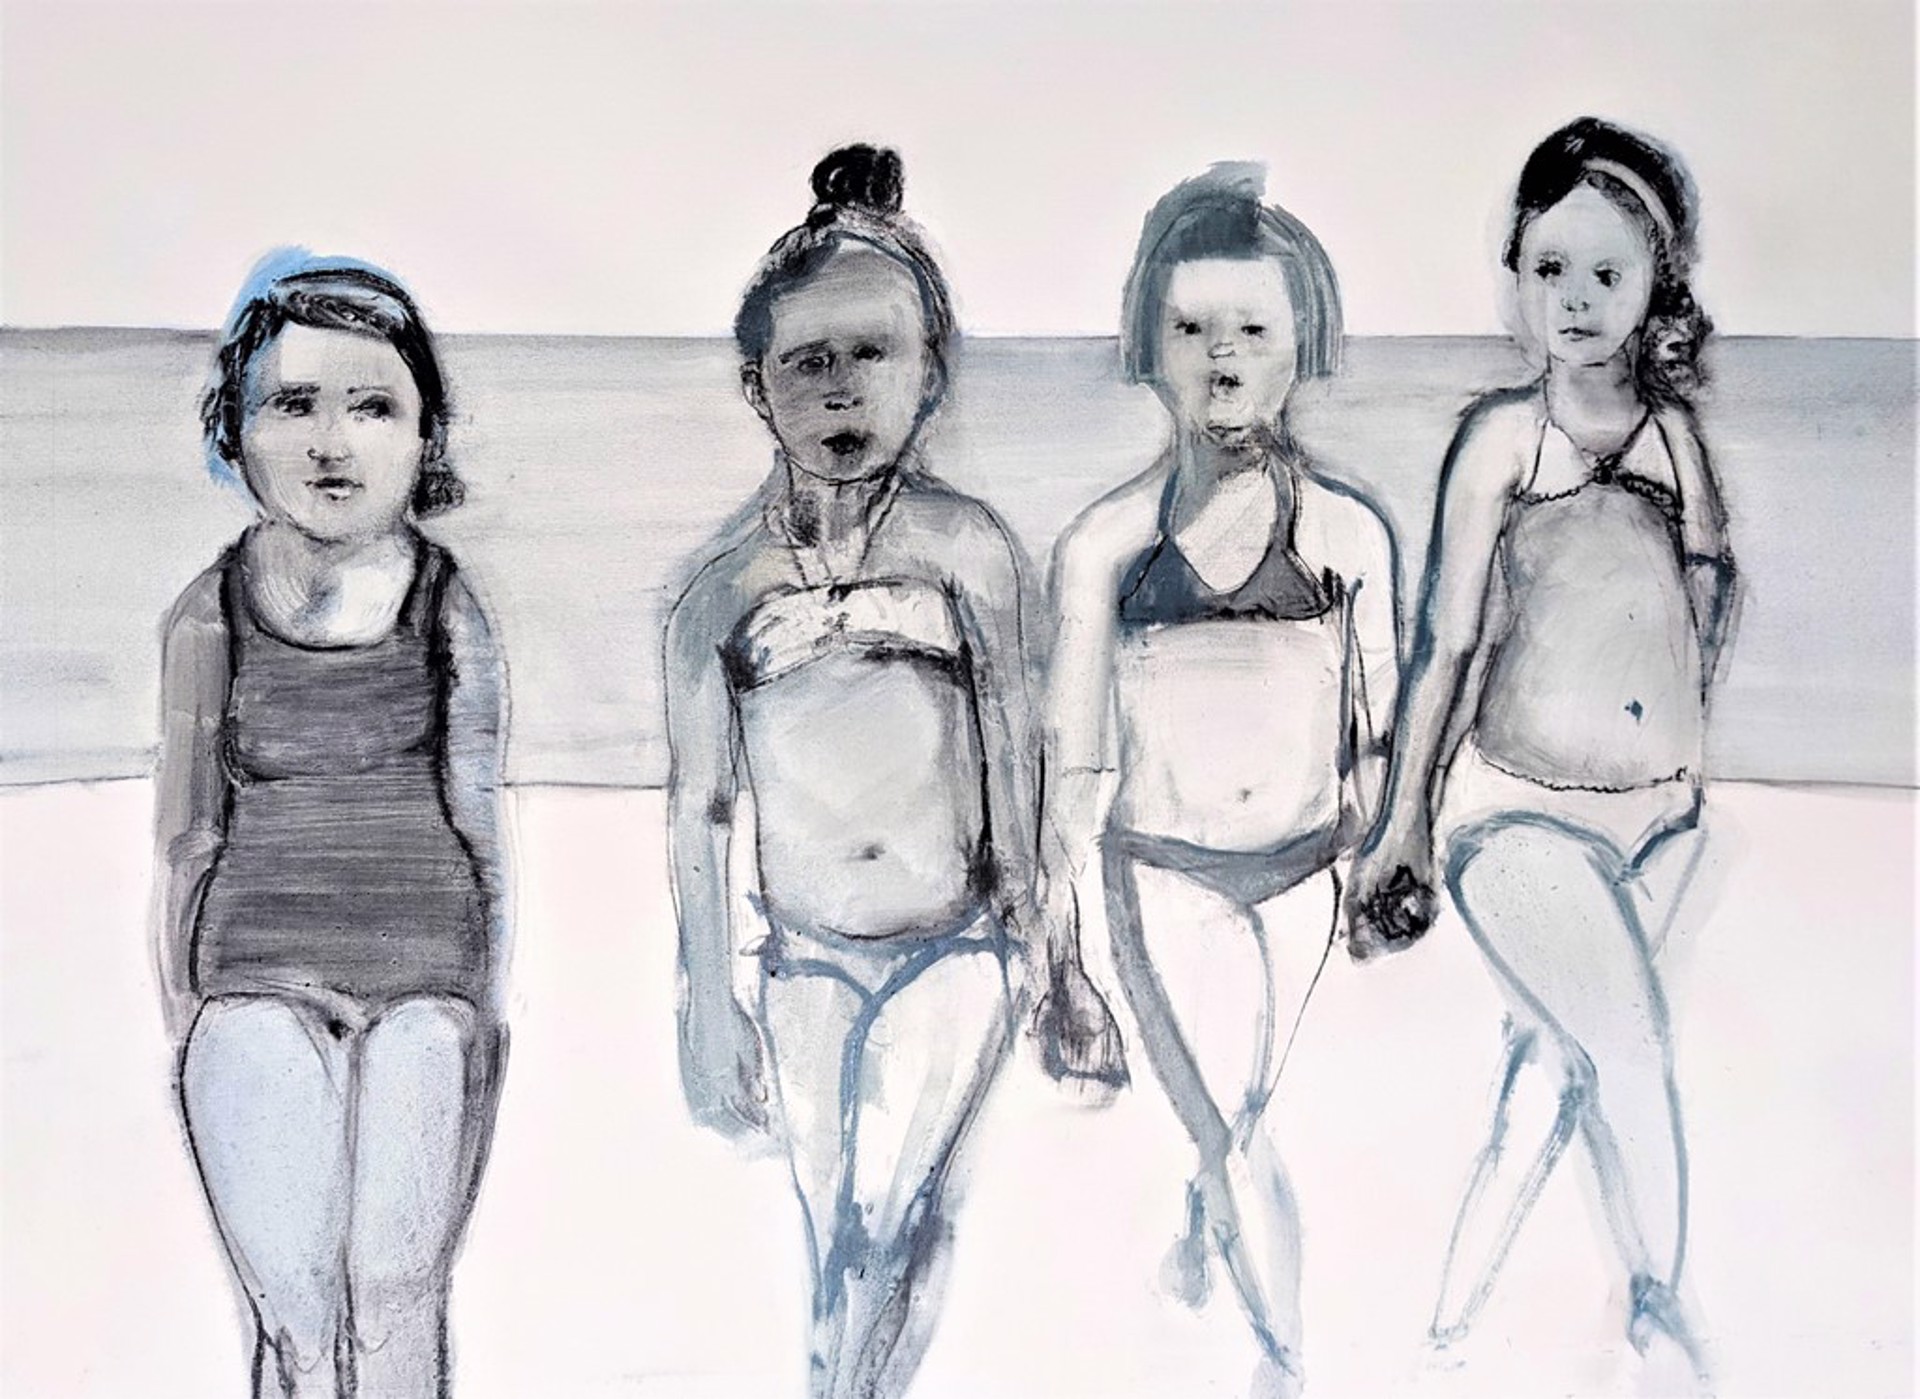 YOUNG LADIES AT THE BEACH by CHRISTINA THWAITES (Figures)